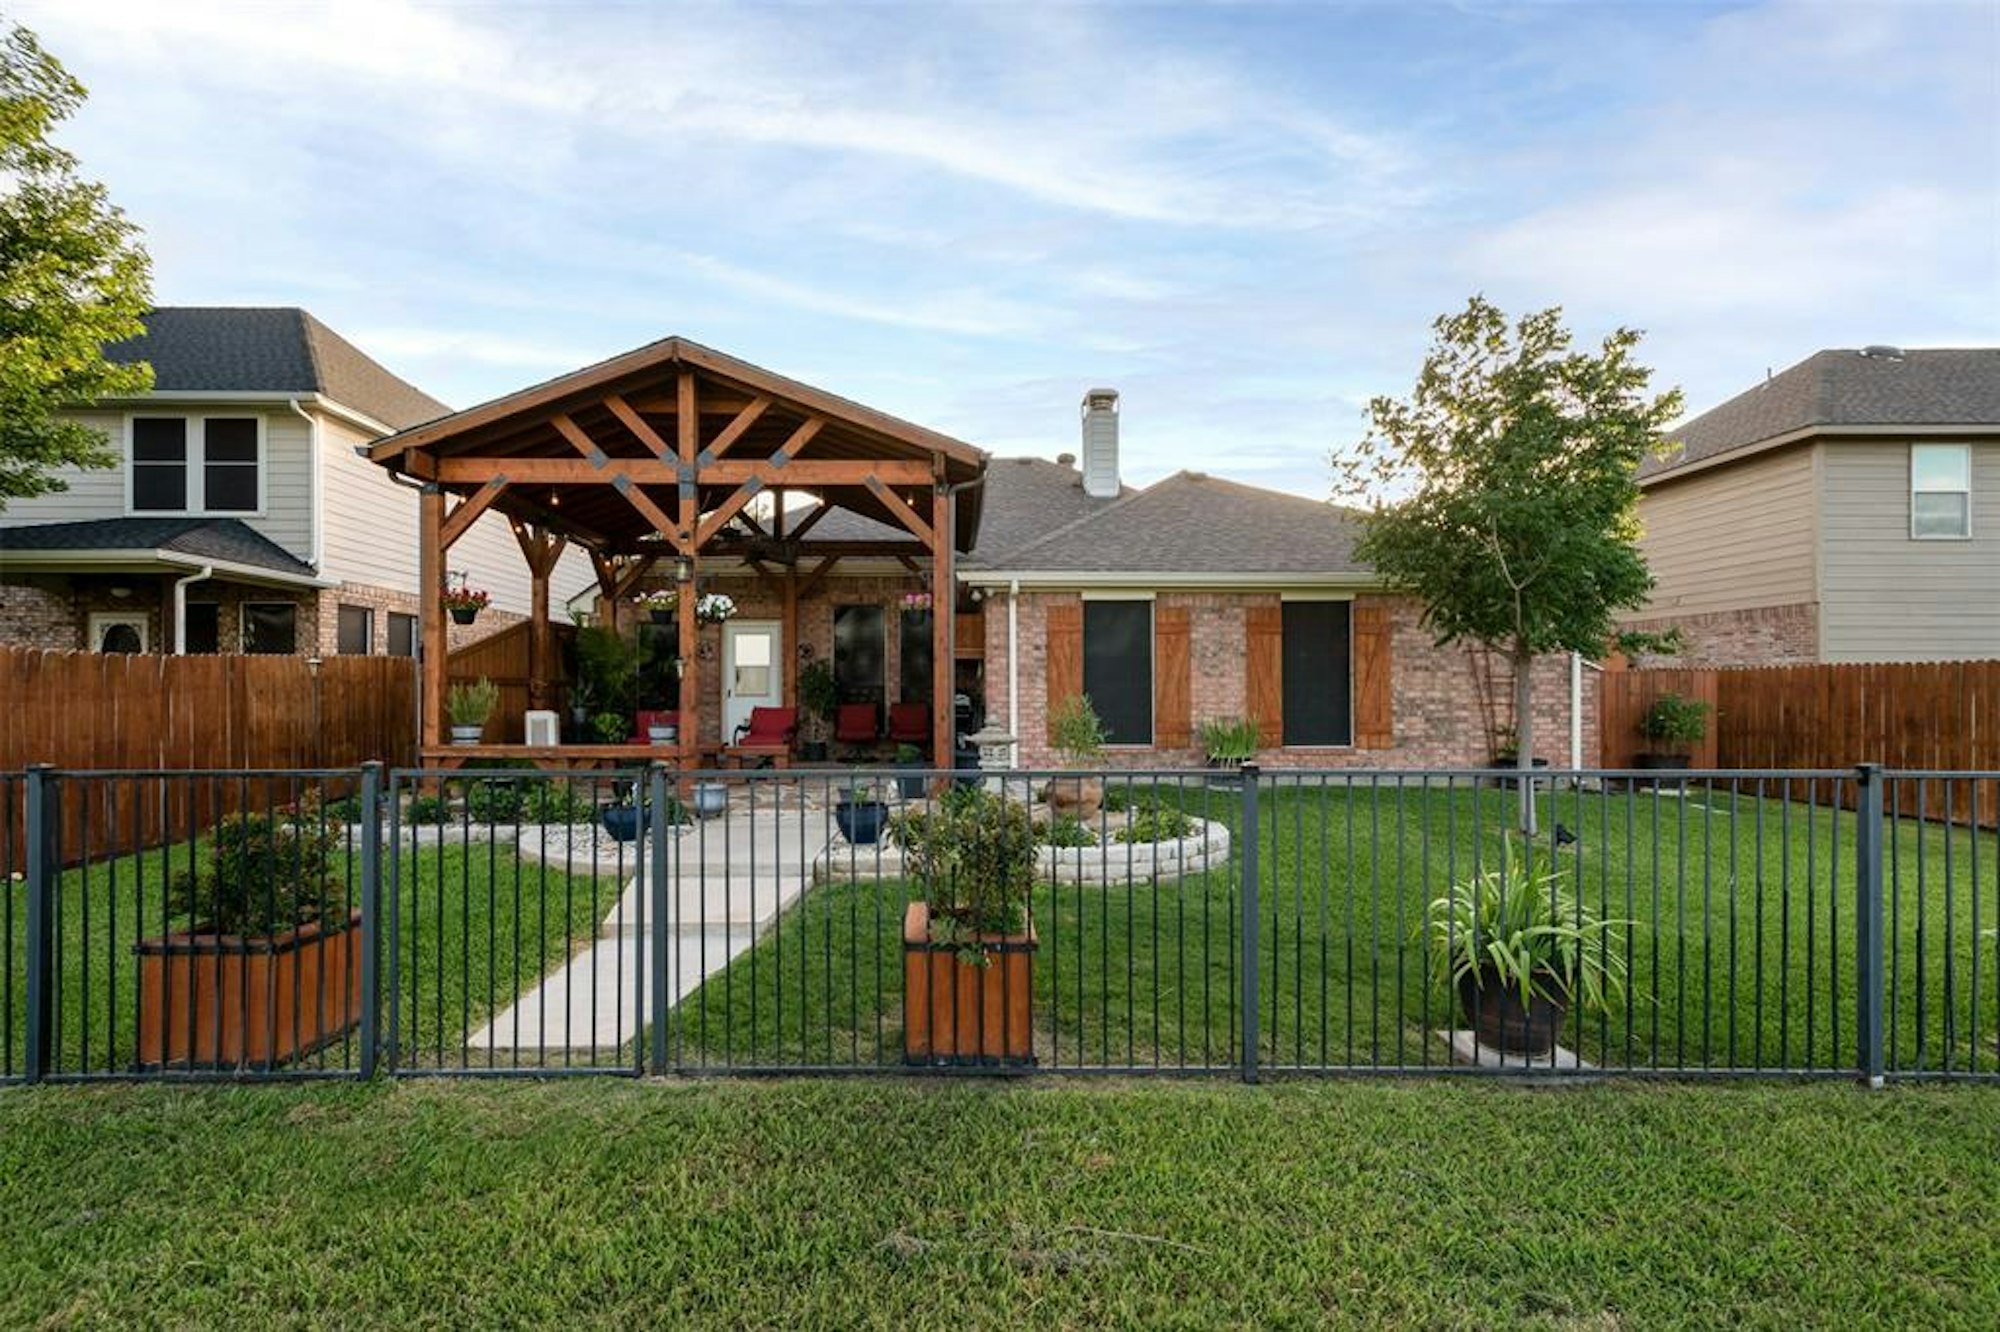 Photo 1 of 35 - 10304 Fossil Valley Dr, Fort Worth, TX 76131